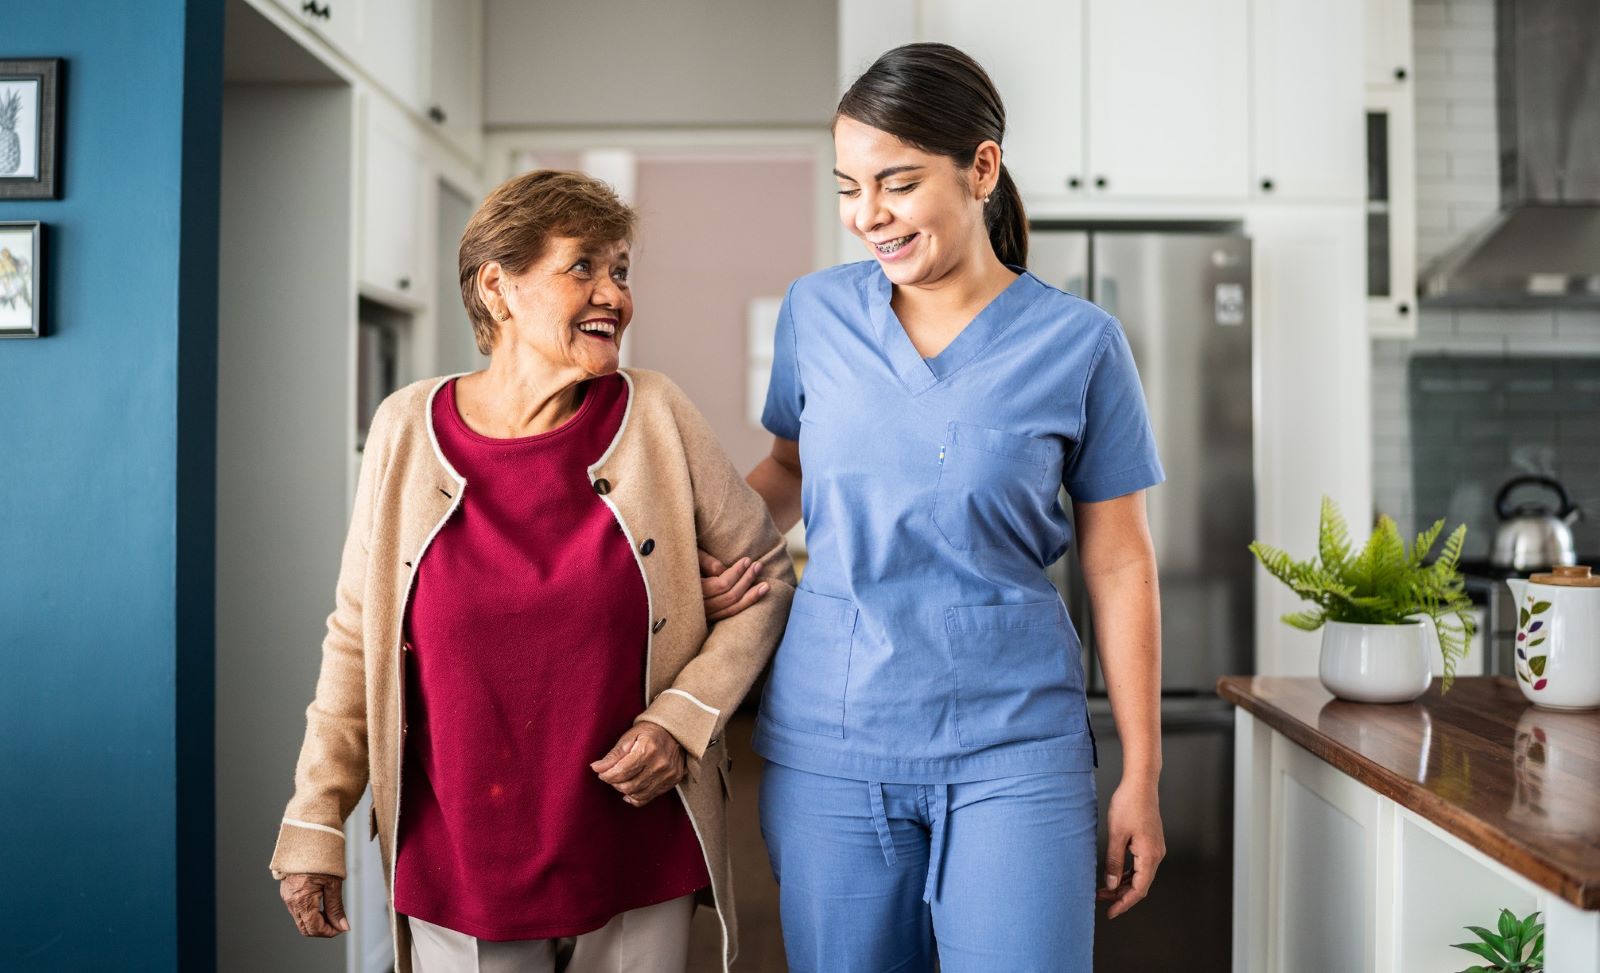 Homecare Options: What Works Best for You?